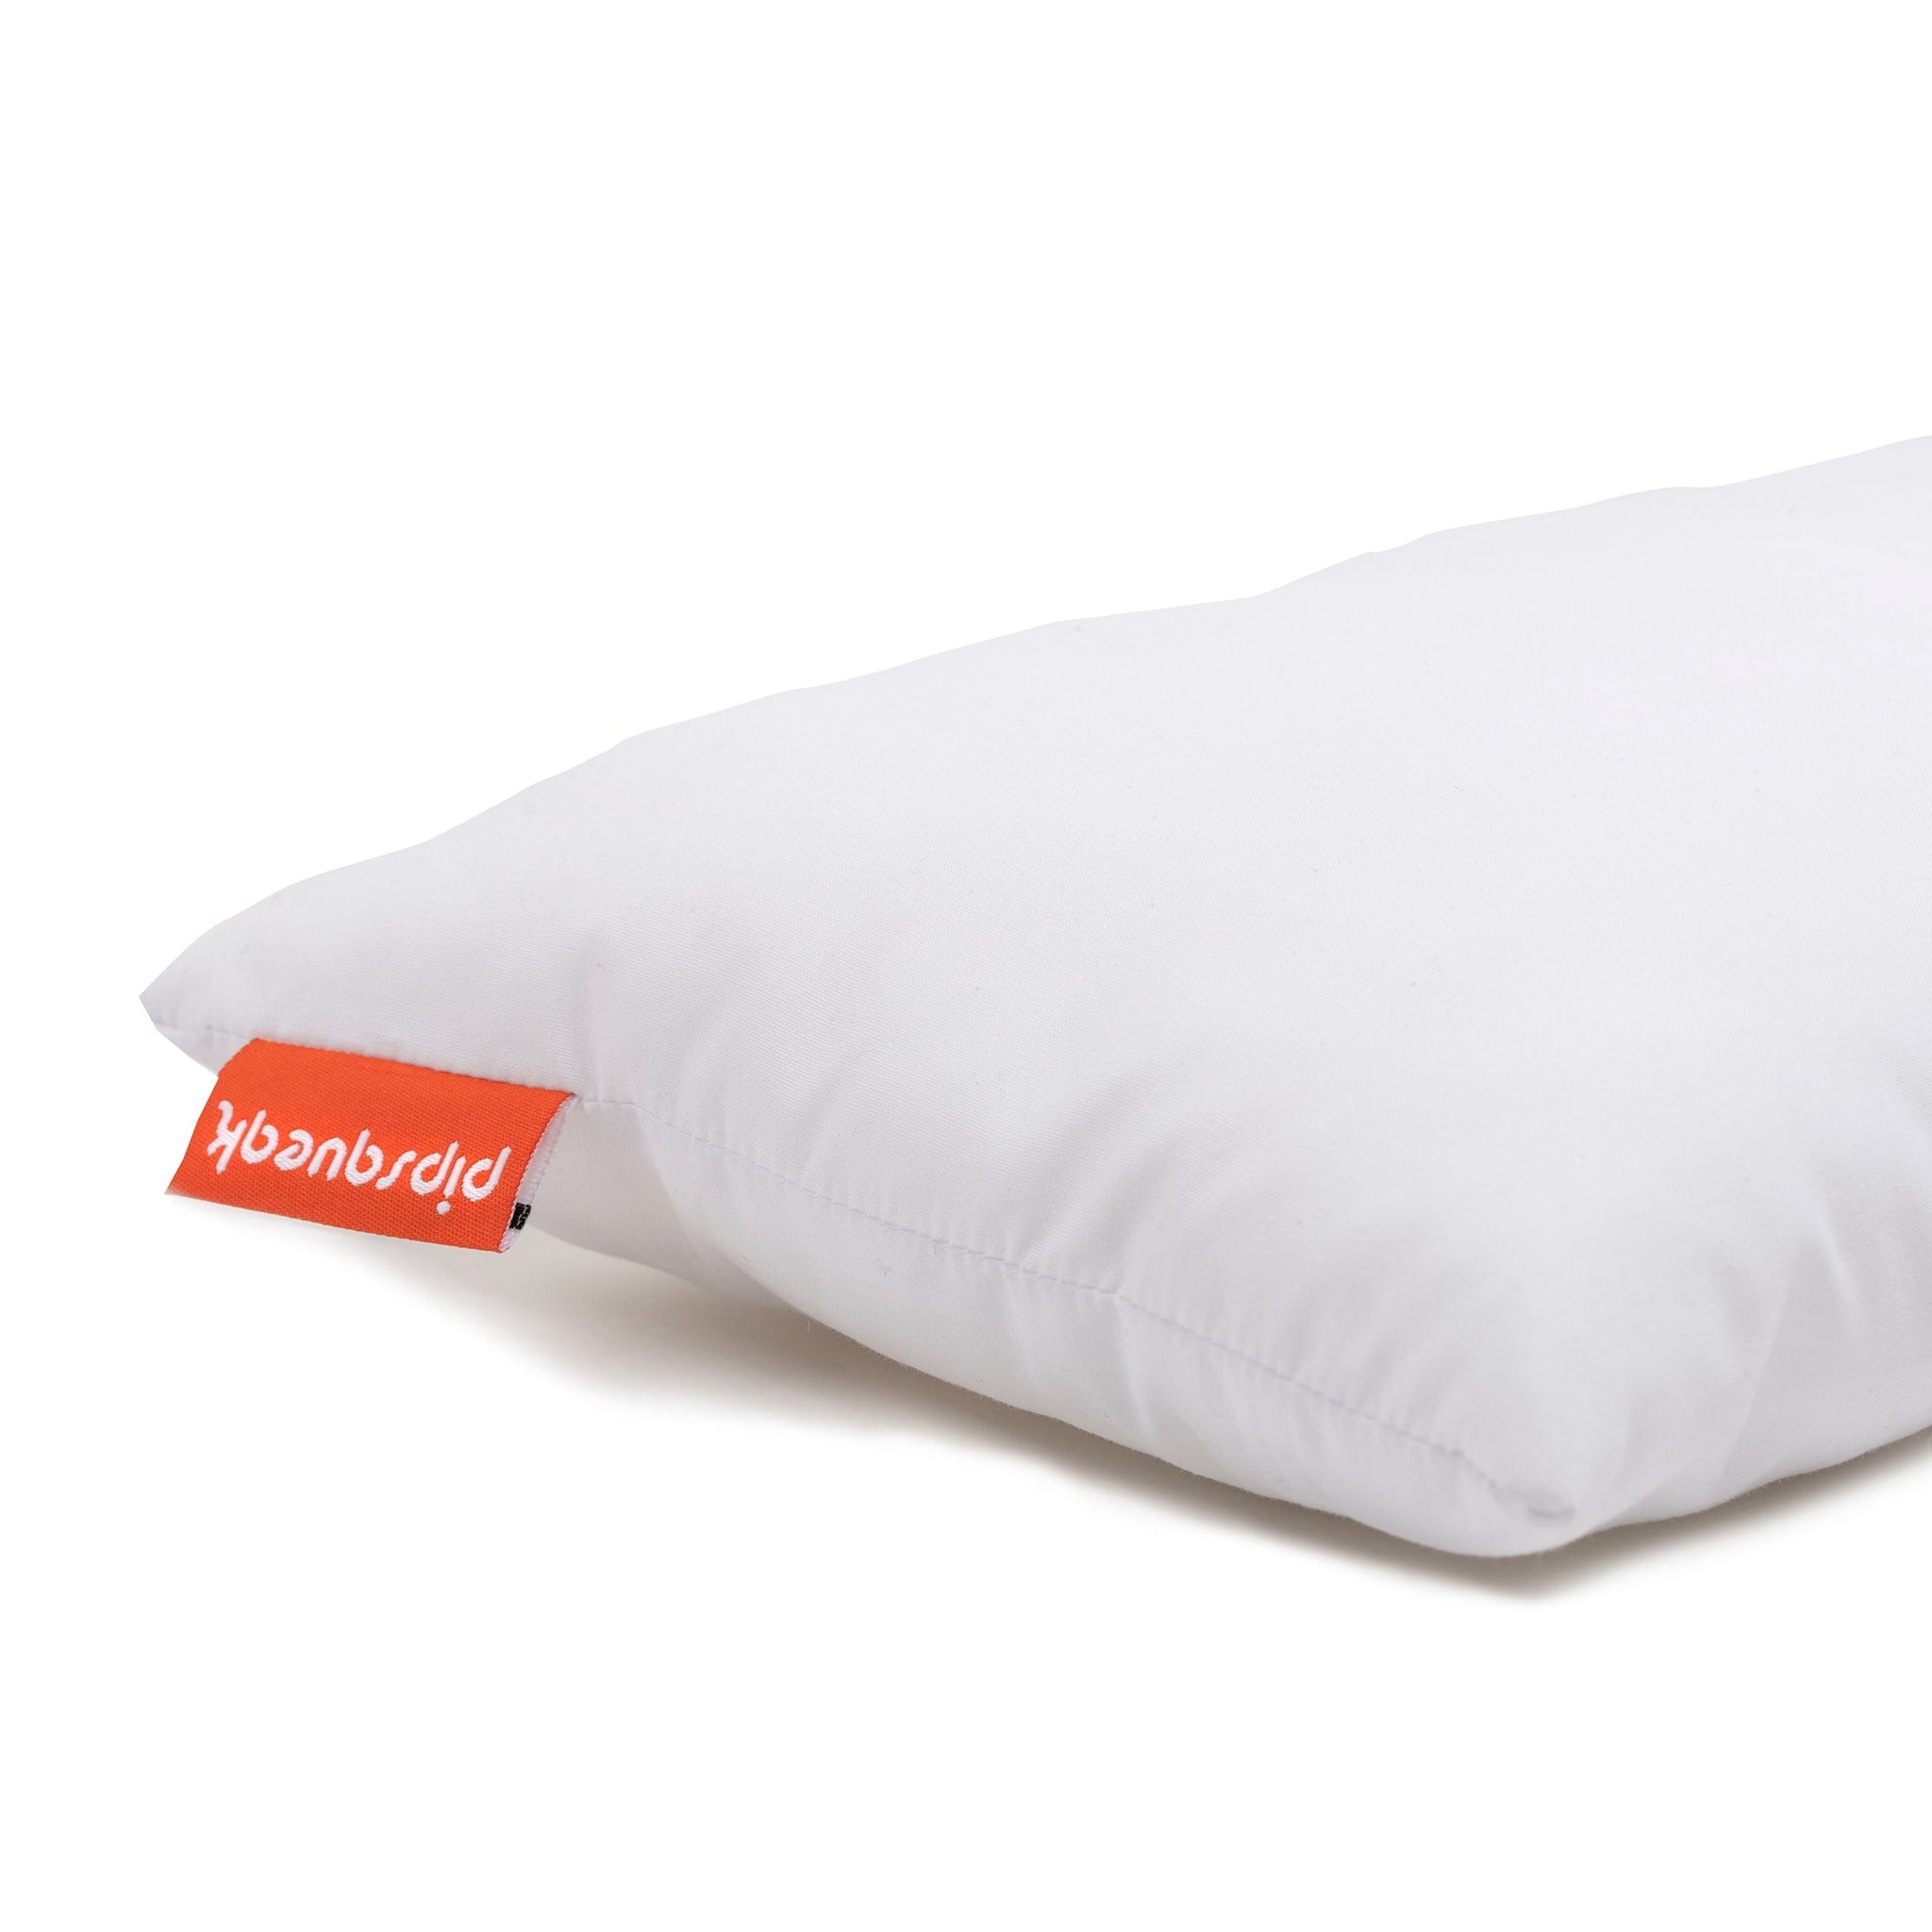 Pipsqueak® Tiny Washable Pillow - Case of 36